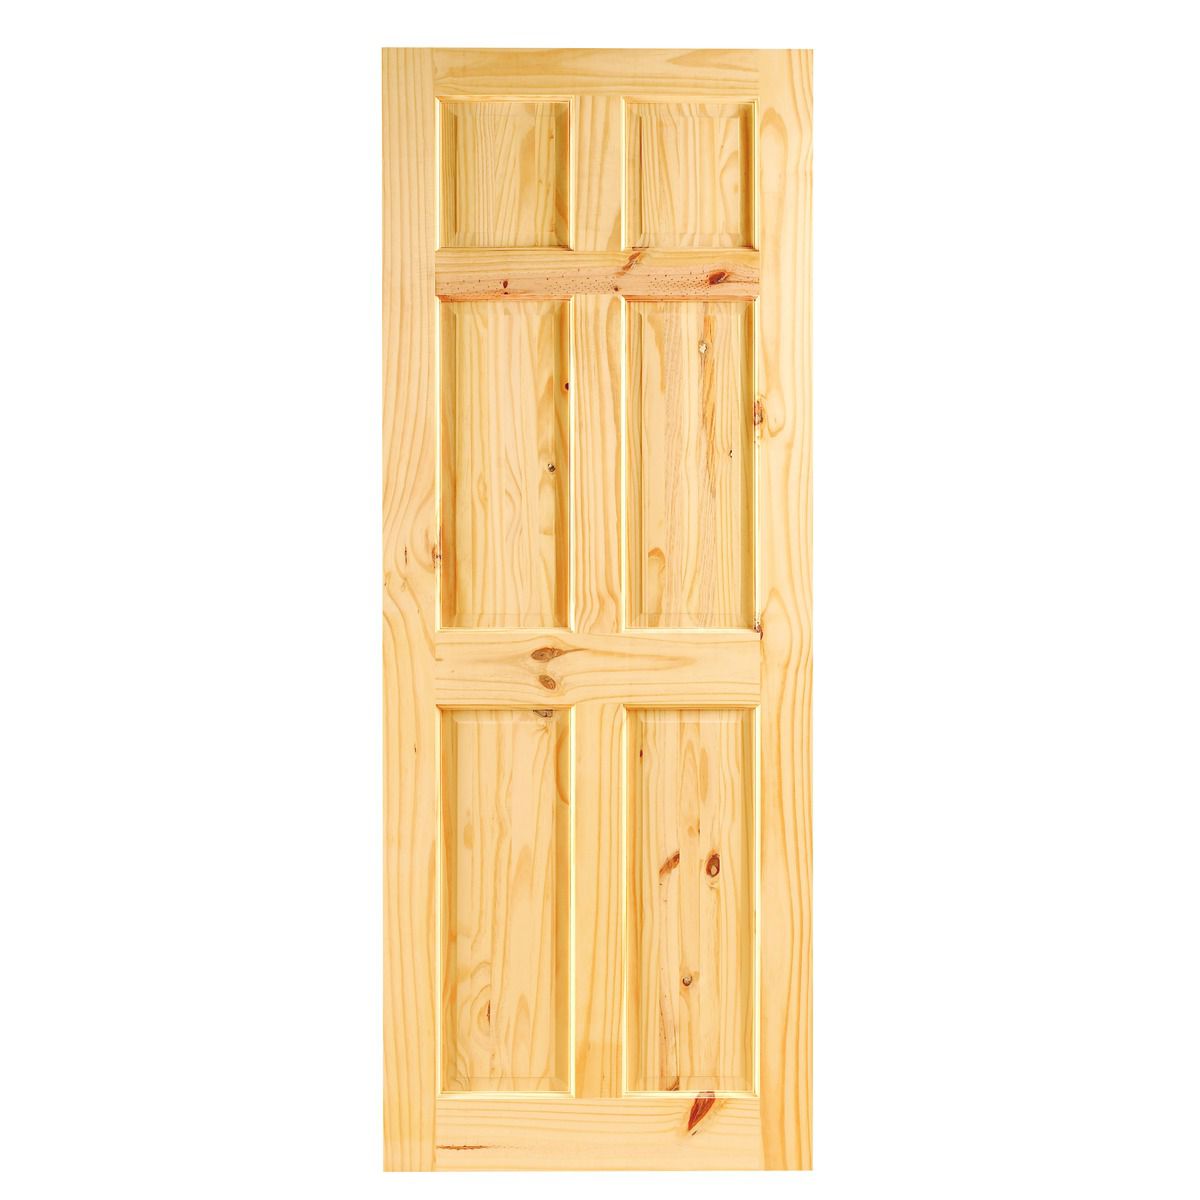 Image of Wickes Lincoln Knotty Pine 6 Panel Internal Door - 1981 x 762mm